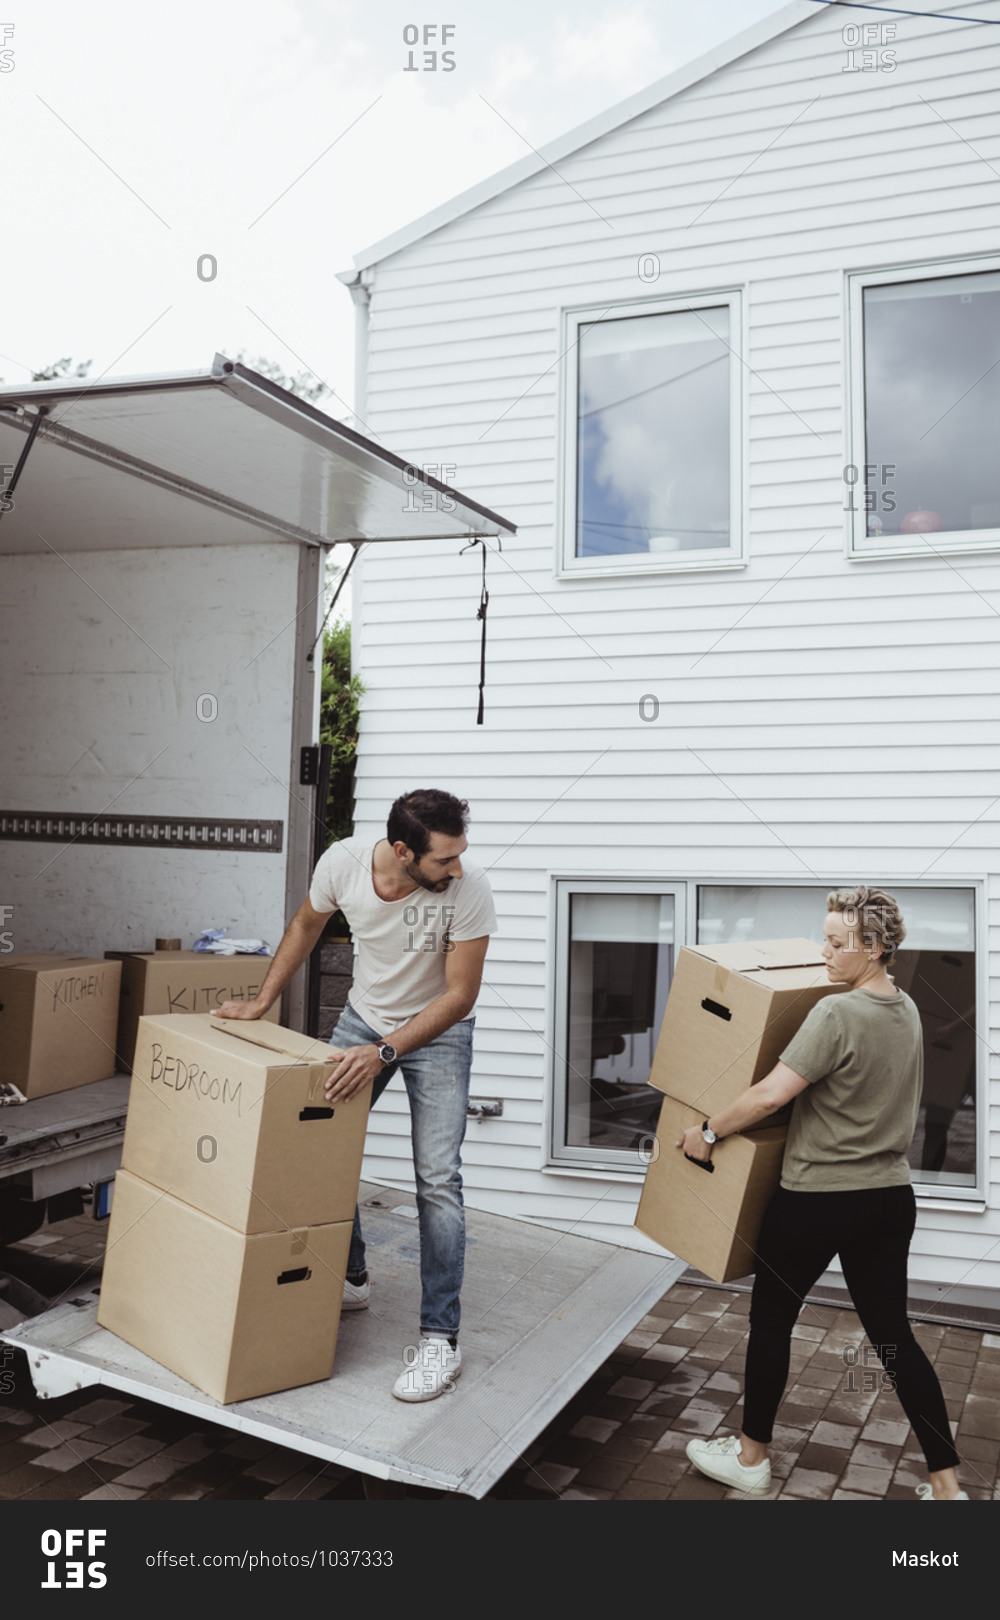 Male and female partners unloading cardboard boxes during relocation